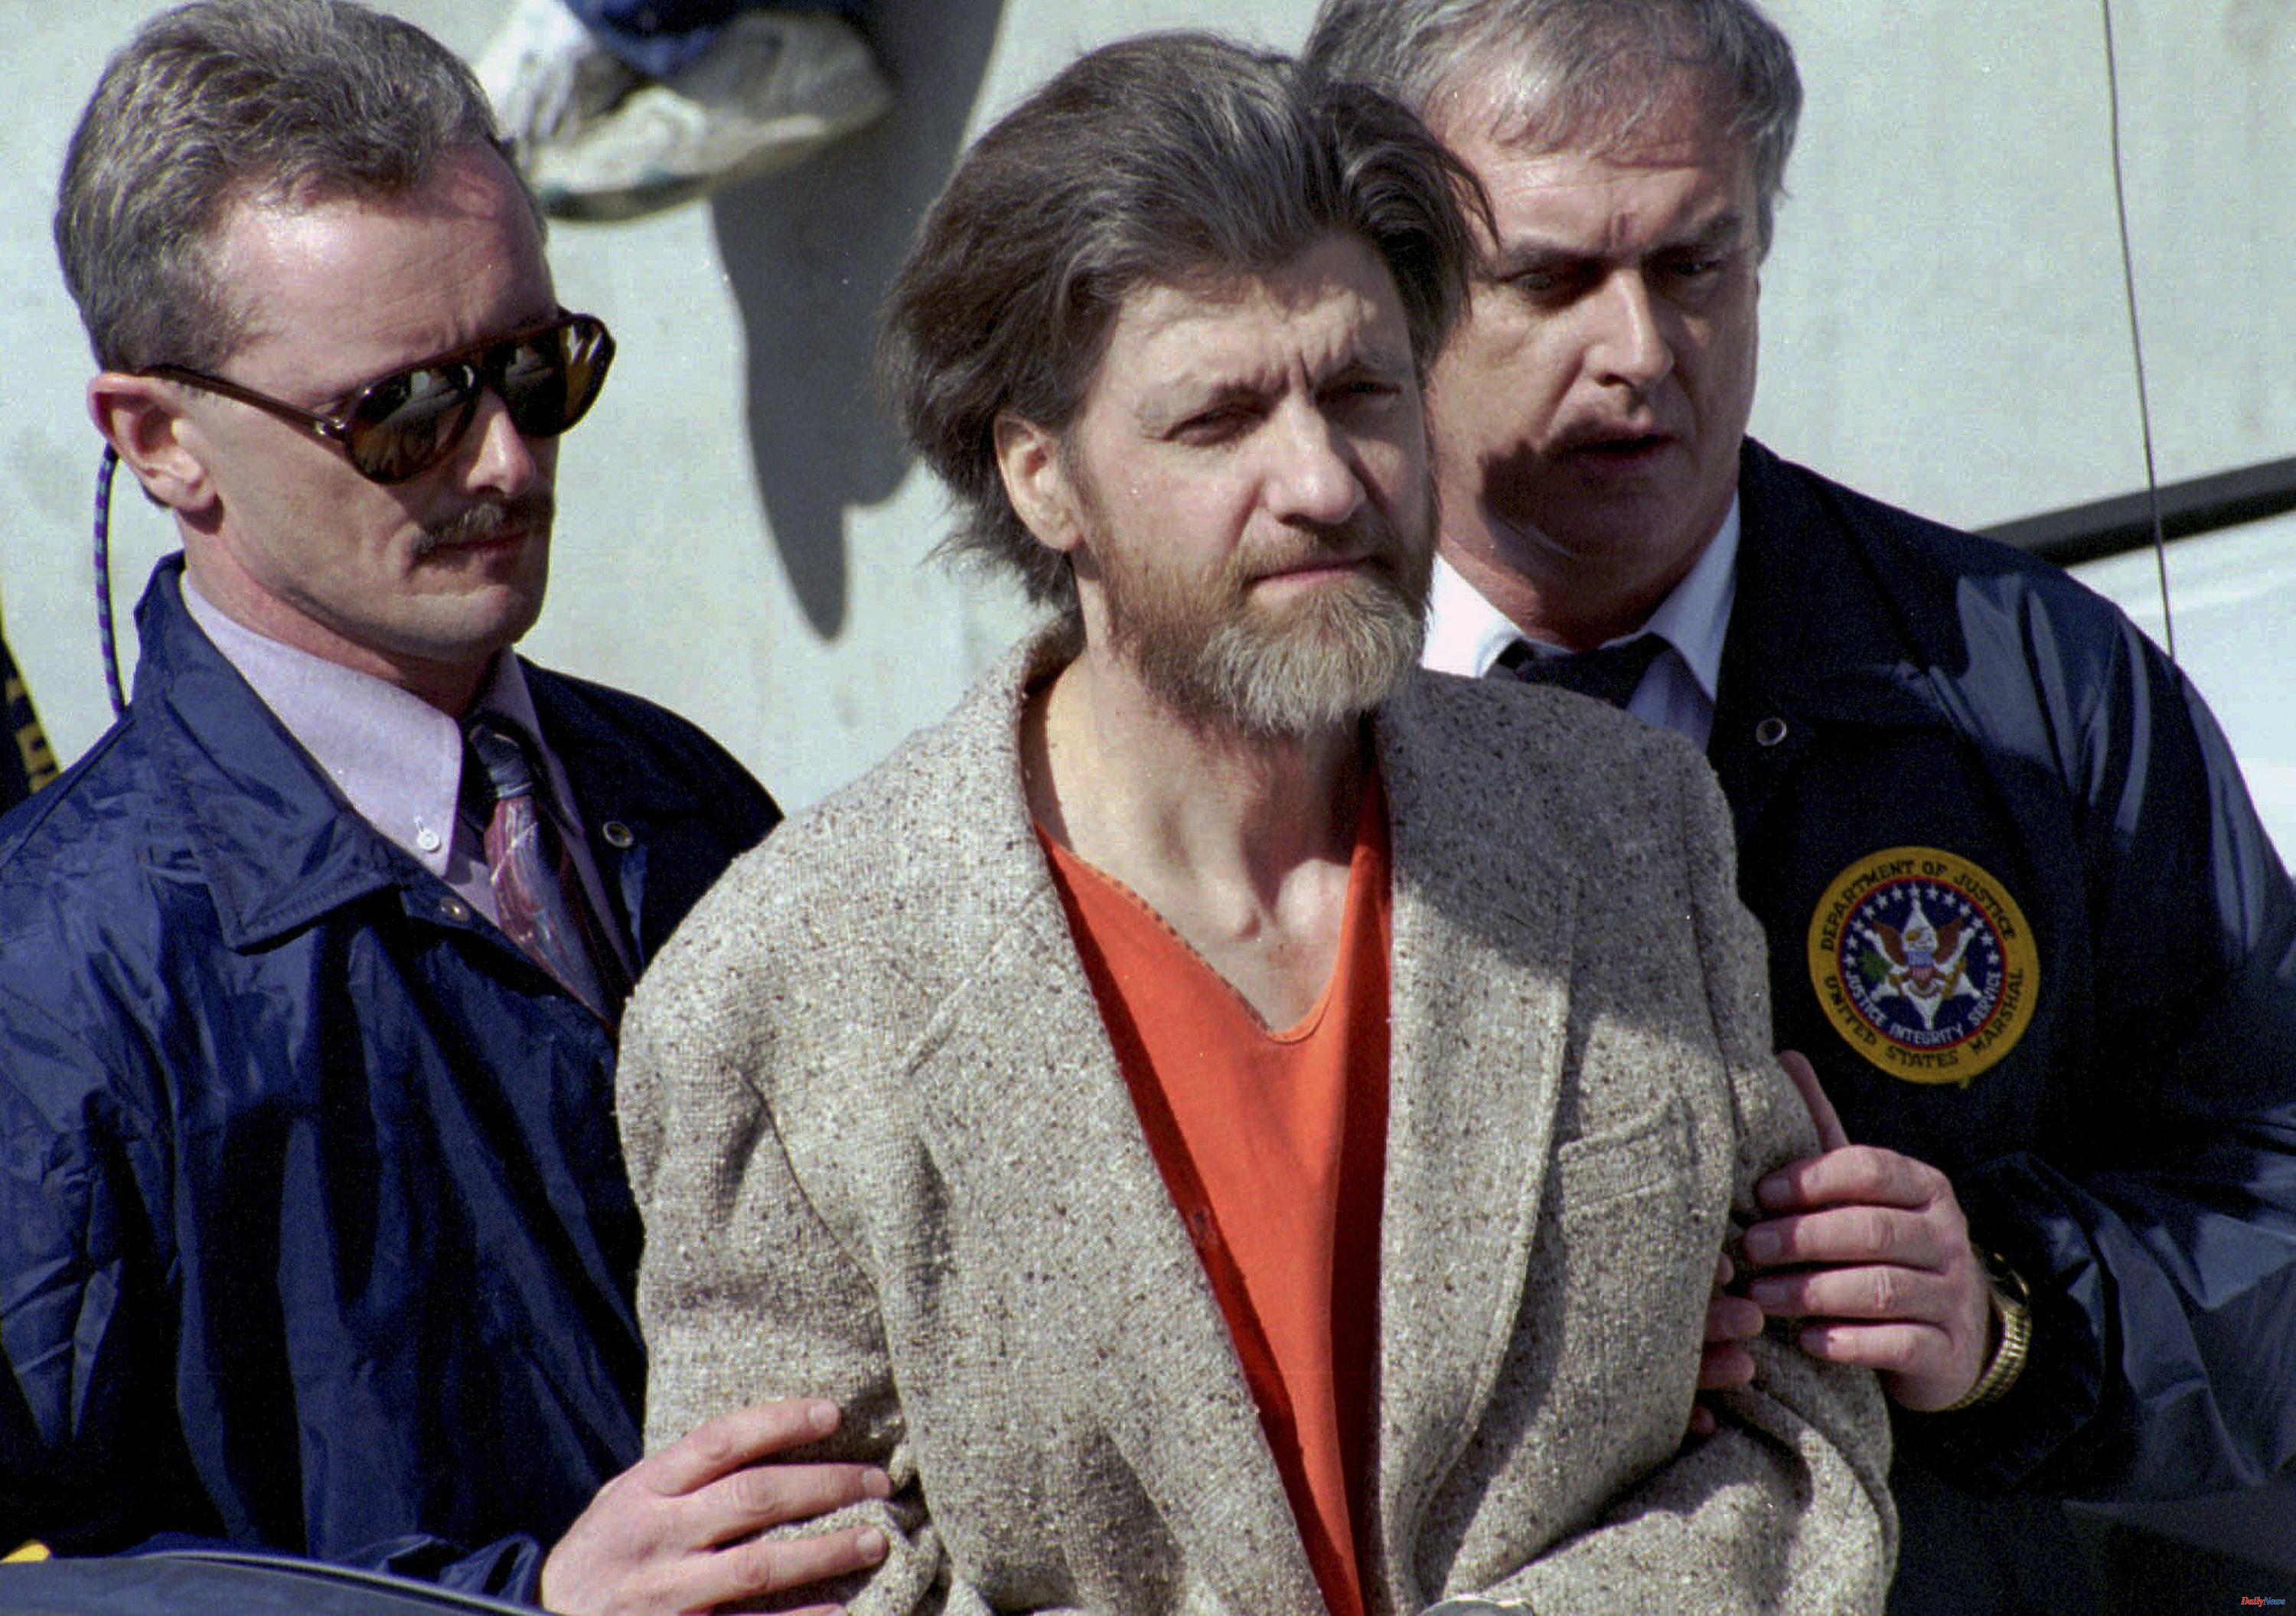 Ted Kaczynski, Unabomber, dies in a federal prison in the US